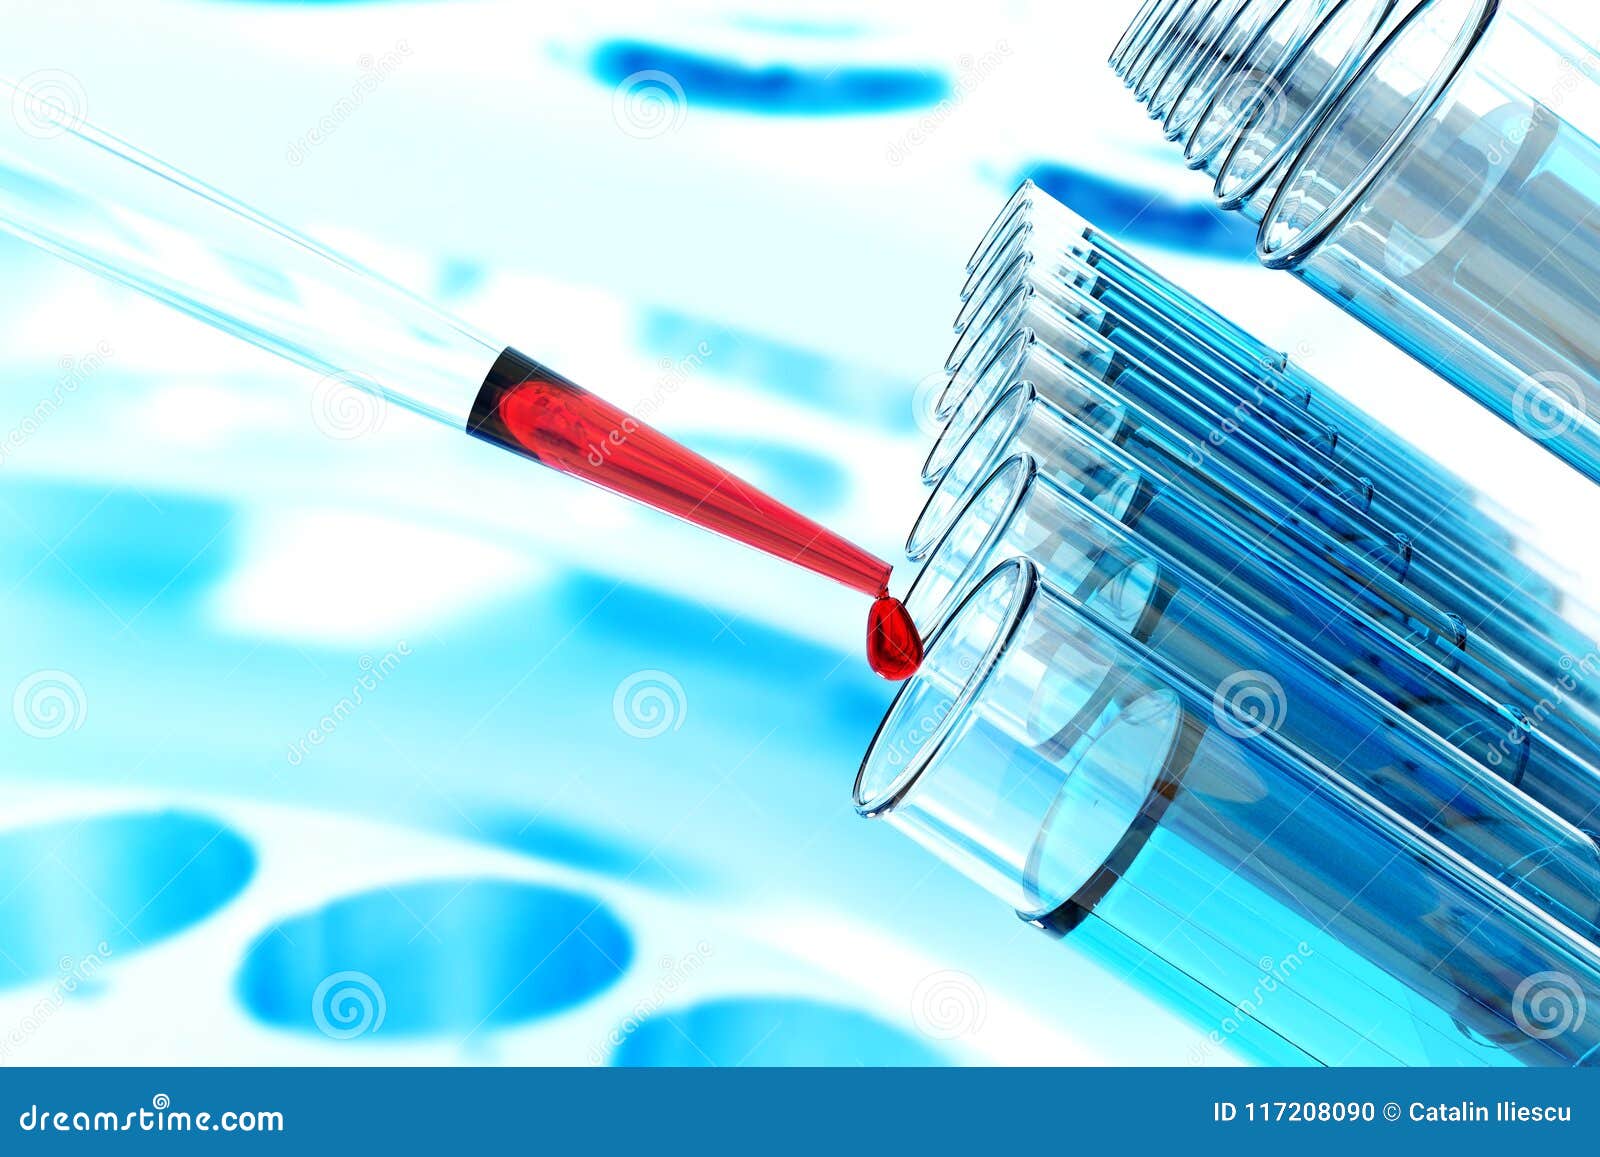 stem cell research pipette science laboratory test tubes lab glassware, science laboratory research and development concept